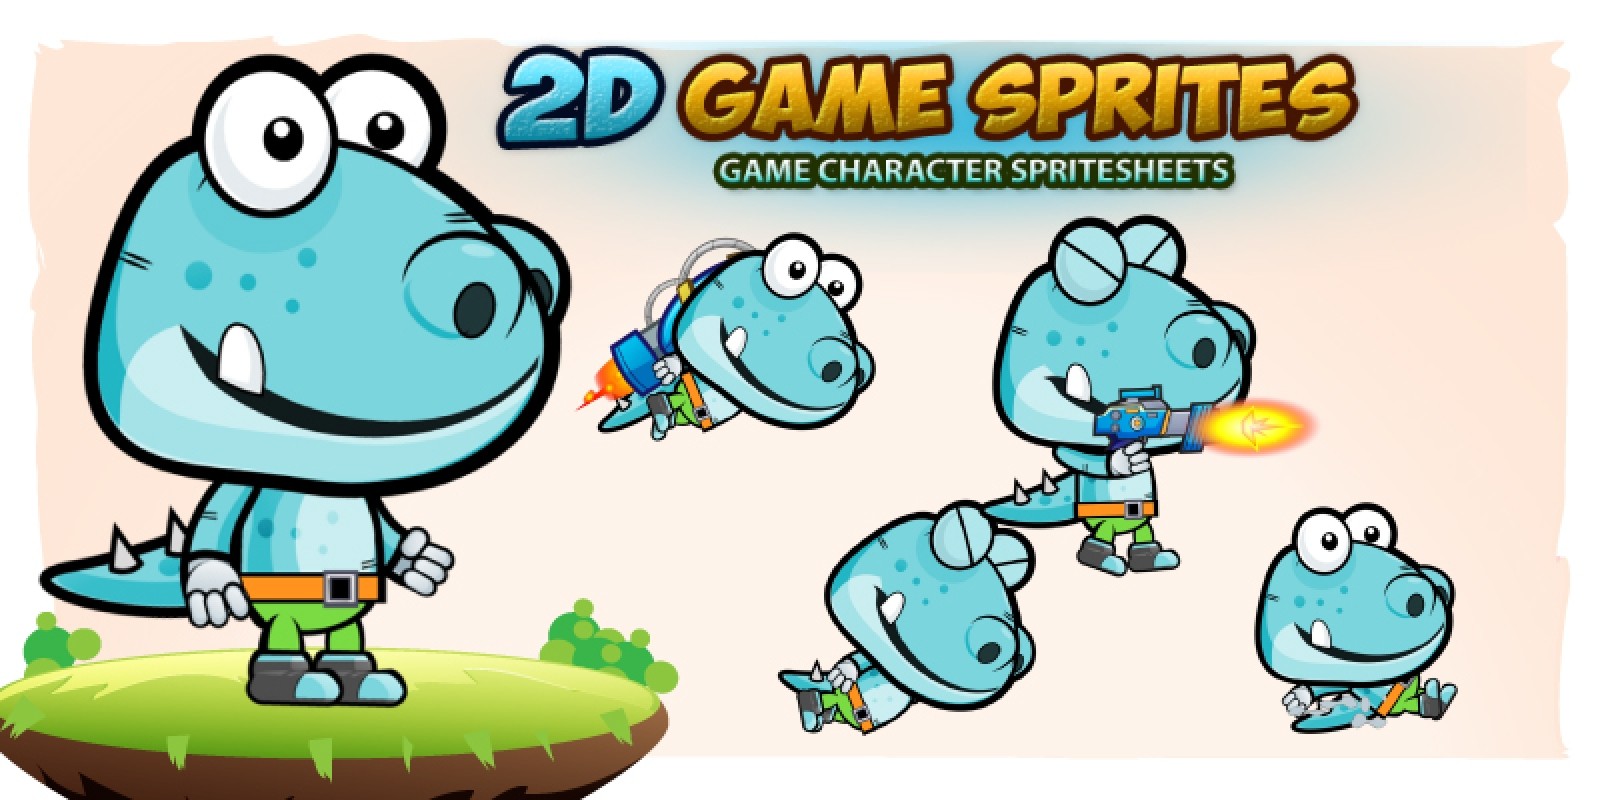 Free sprite with cute dinosaur character. Suitable for the 2d